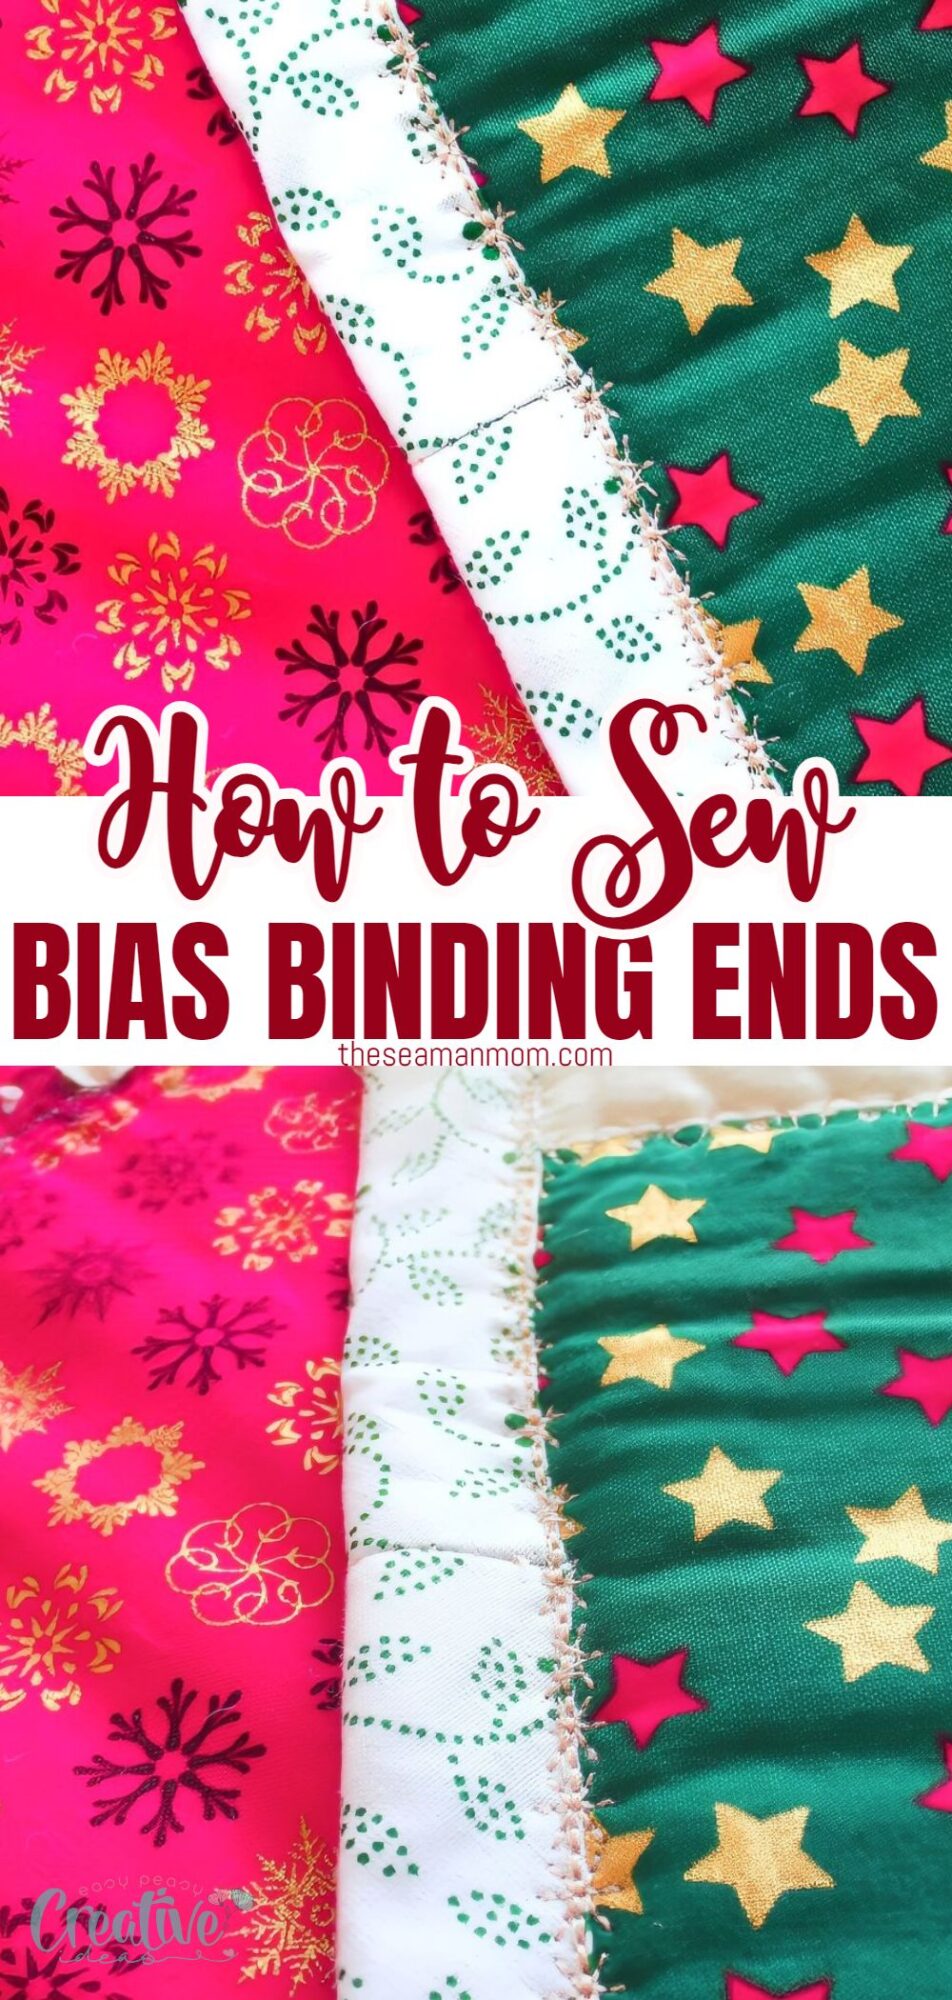 Learn how to sew bias binding ends with this step-by-step guide. Master the art of finishing edges beautifully!